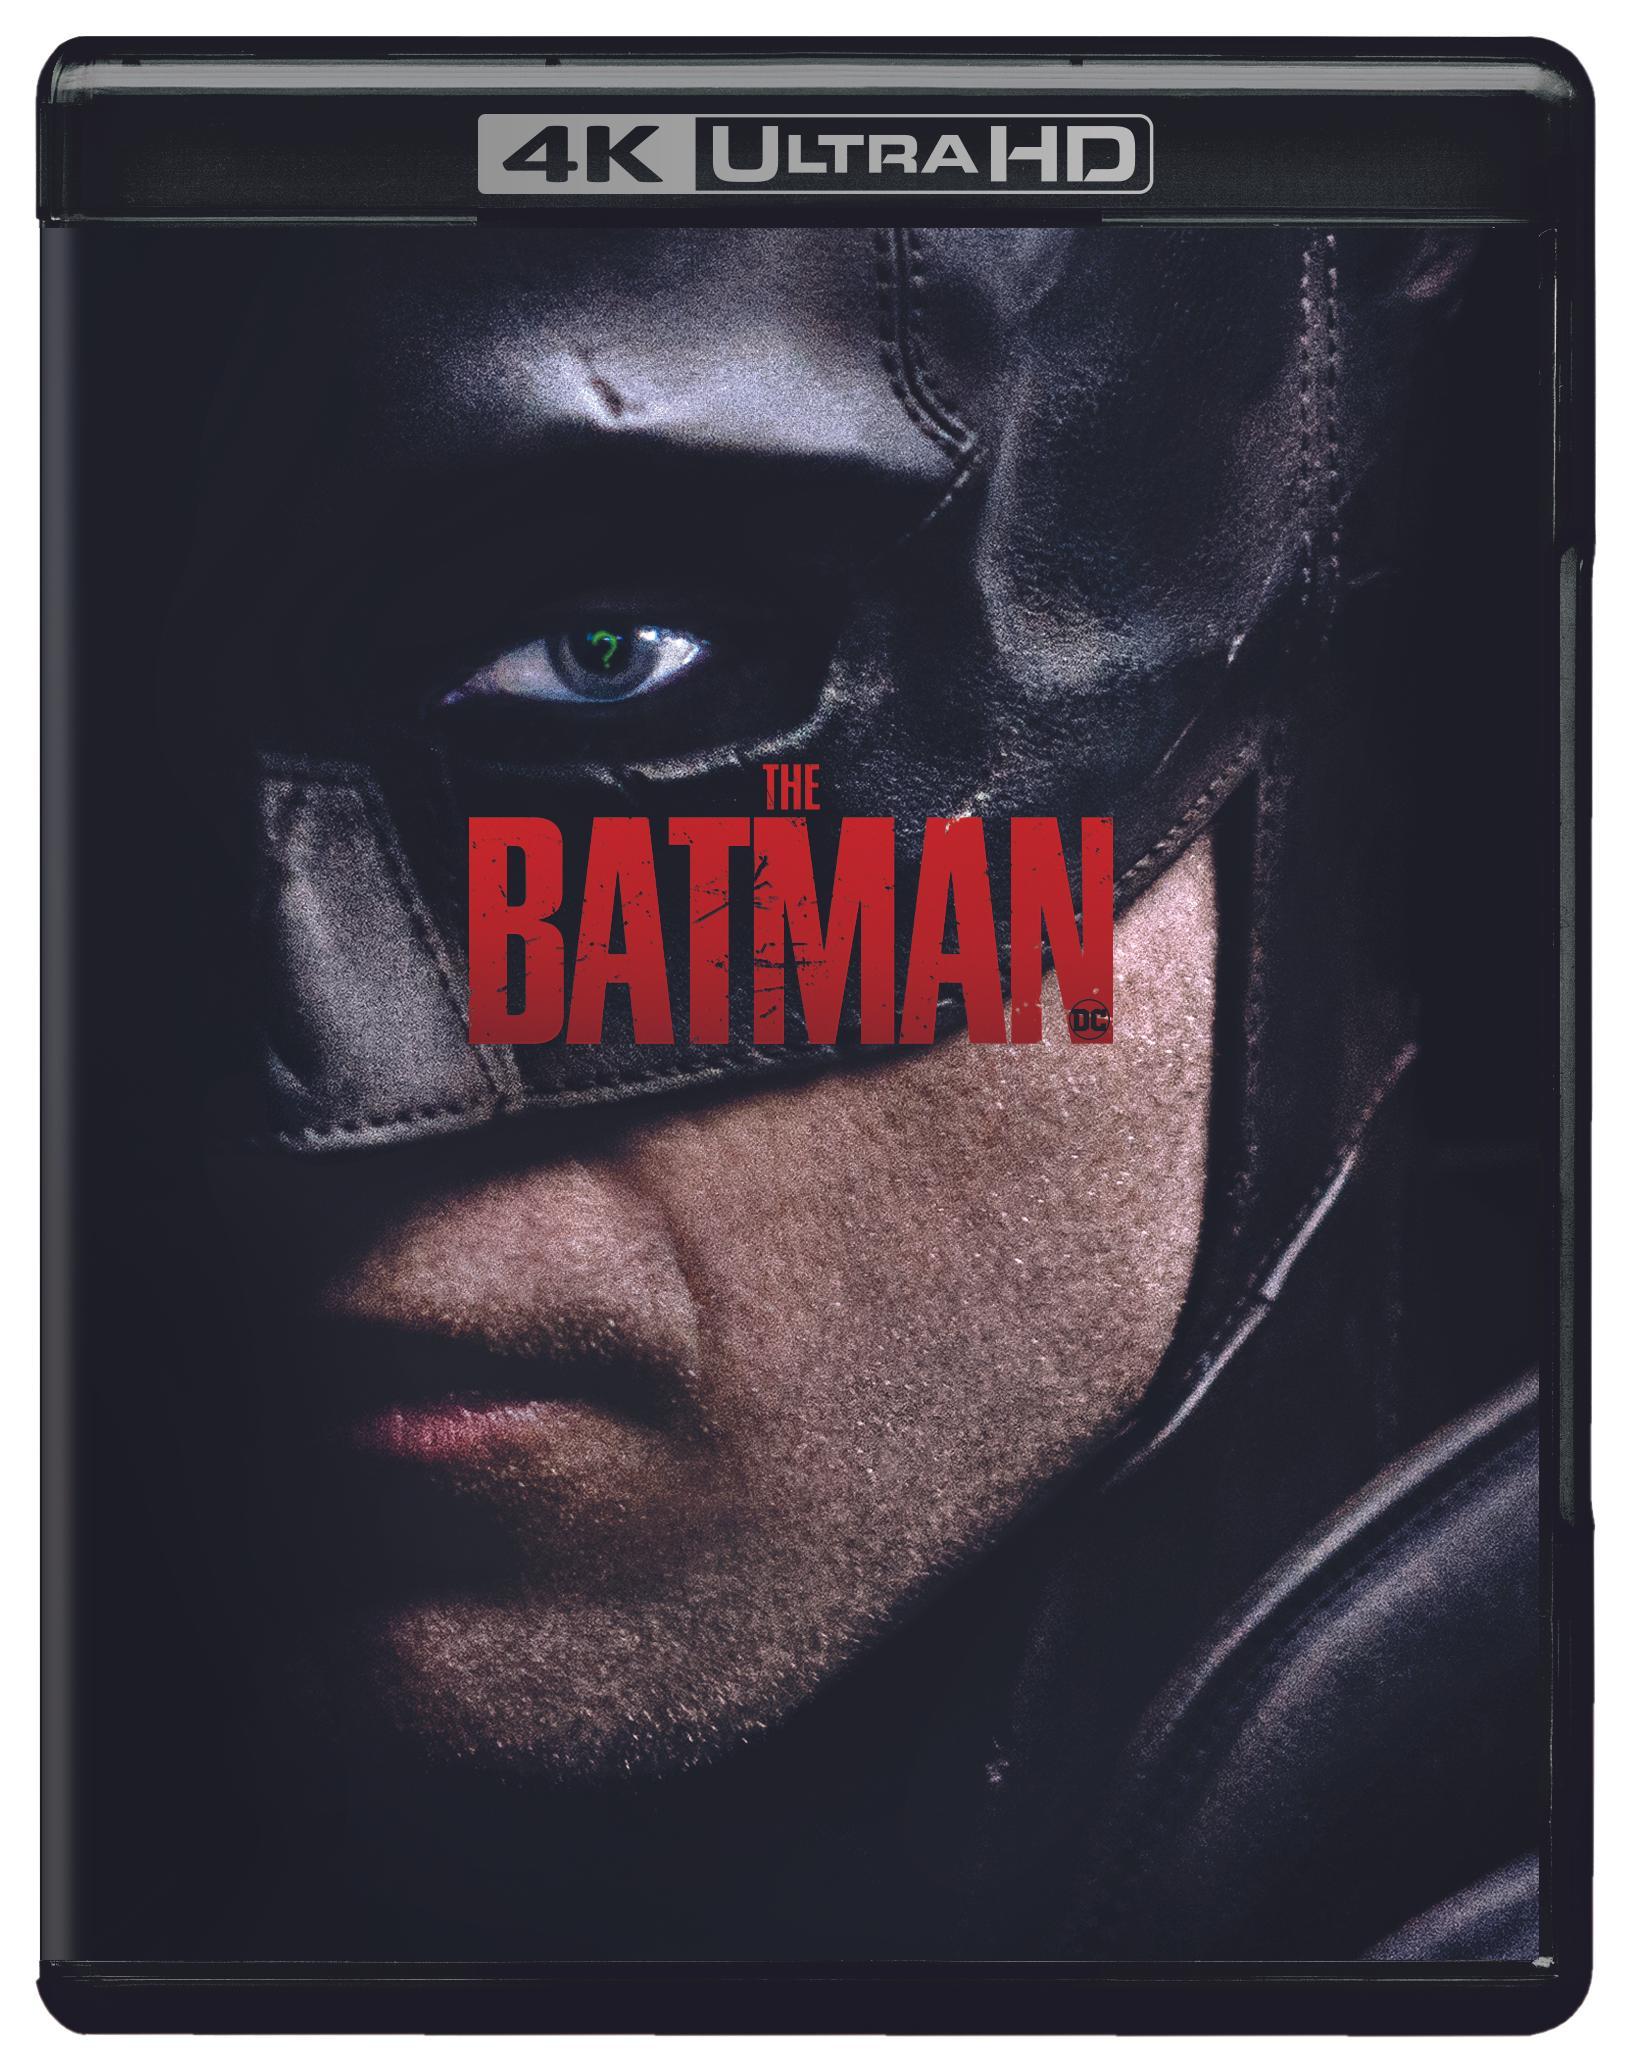 The Batman (Includes Blu-ray) - UHD [ 2022 ]  - Action Movies On 4K Ultra HD Blu-ray - Movies On GRUV